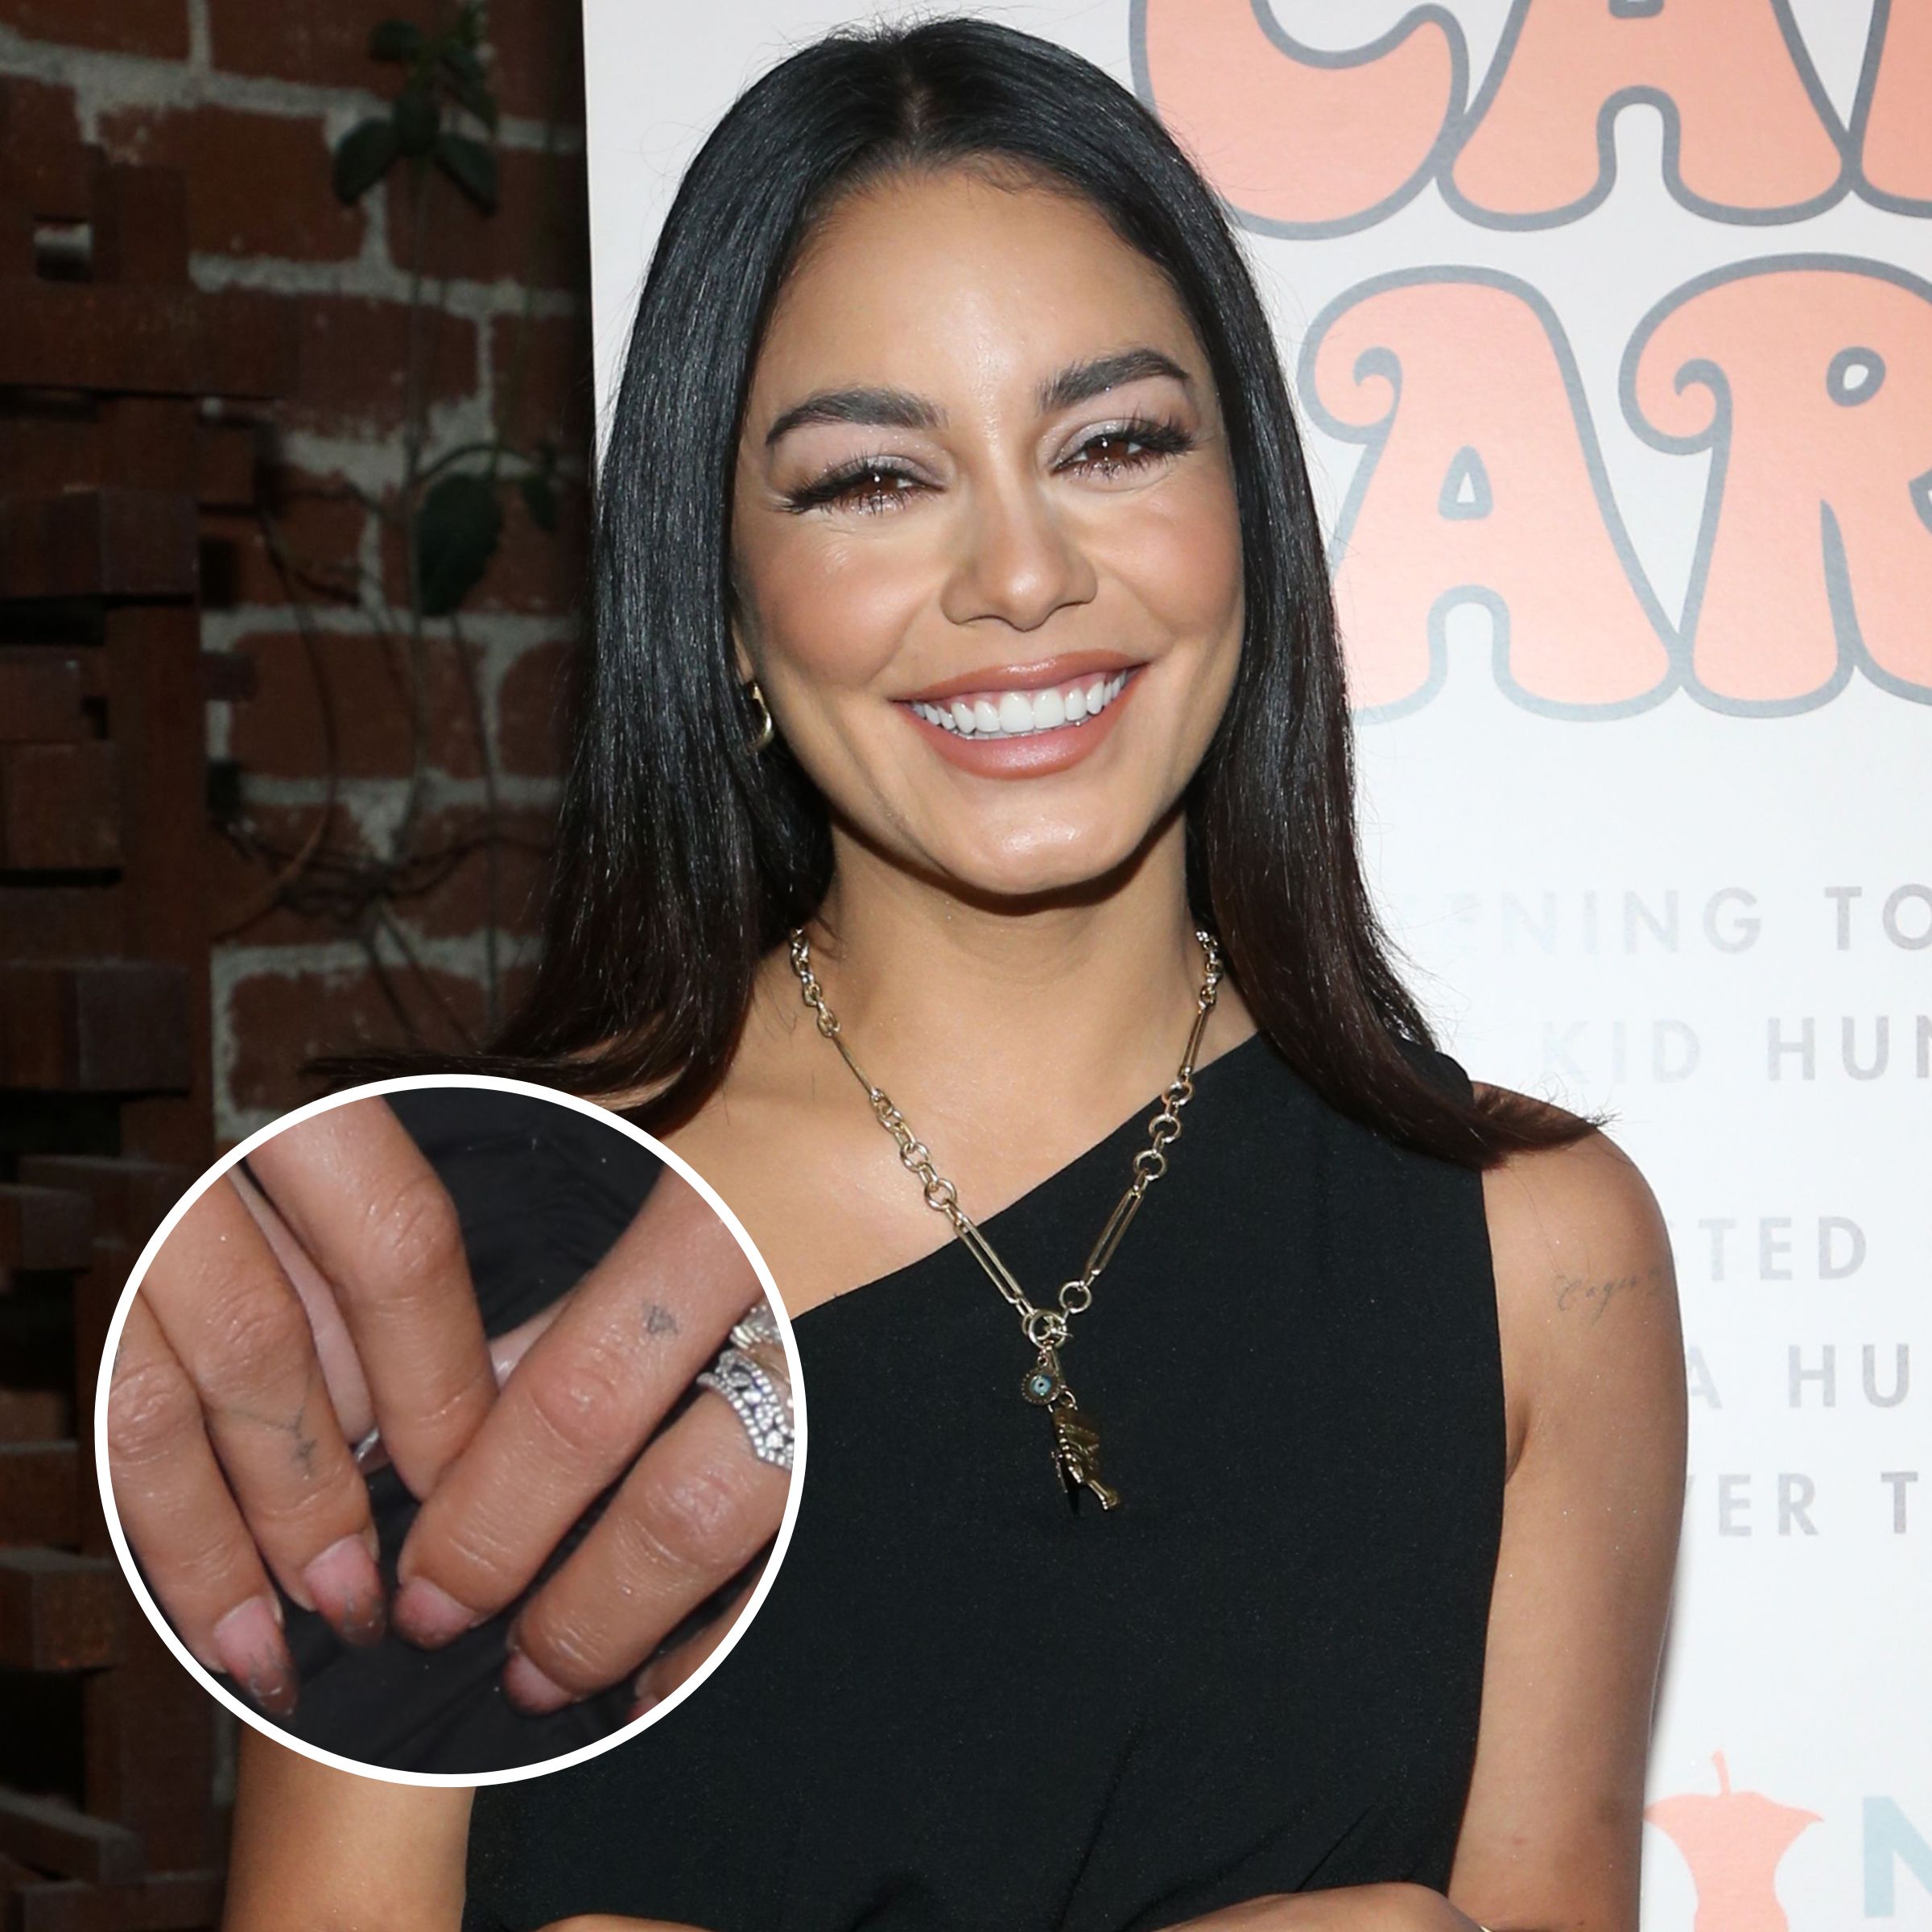 Vanessa Hudgens Got a Tattoo Inspired By Her New Film  Tattoo Ideas  Artists and Models